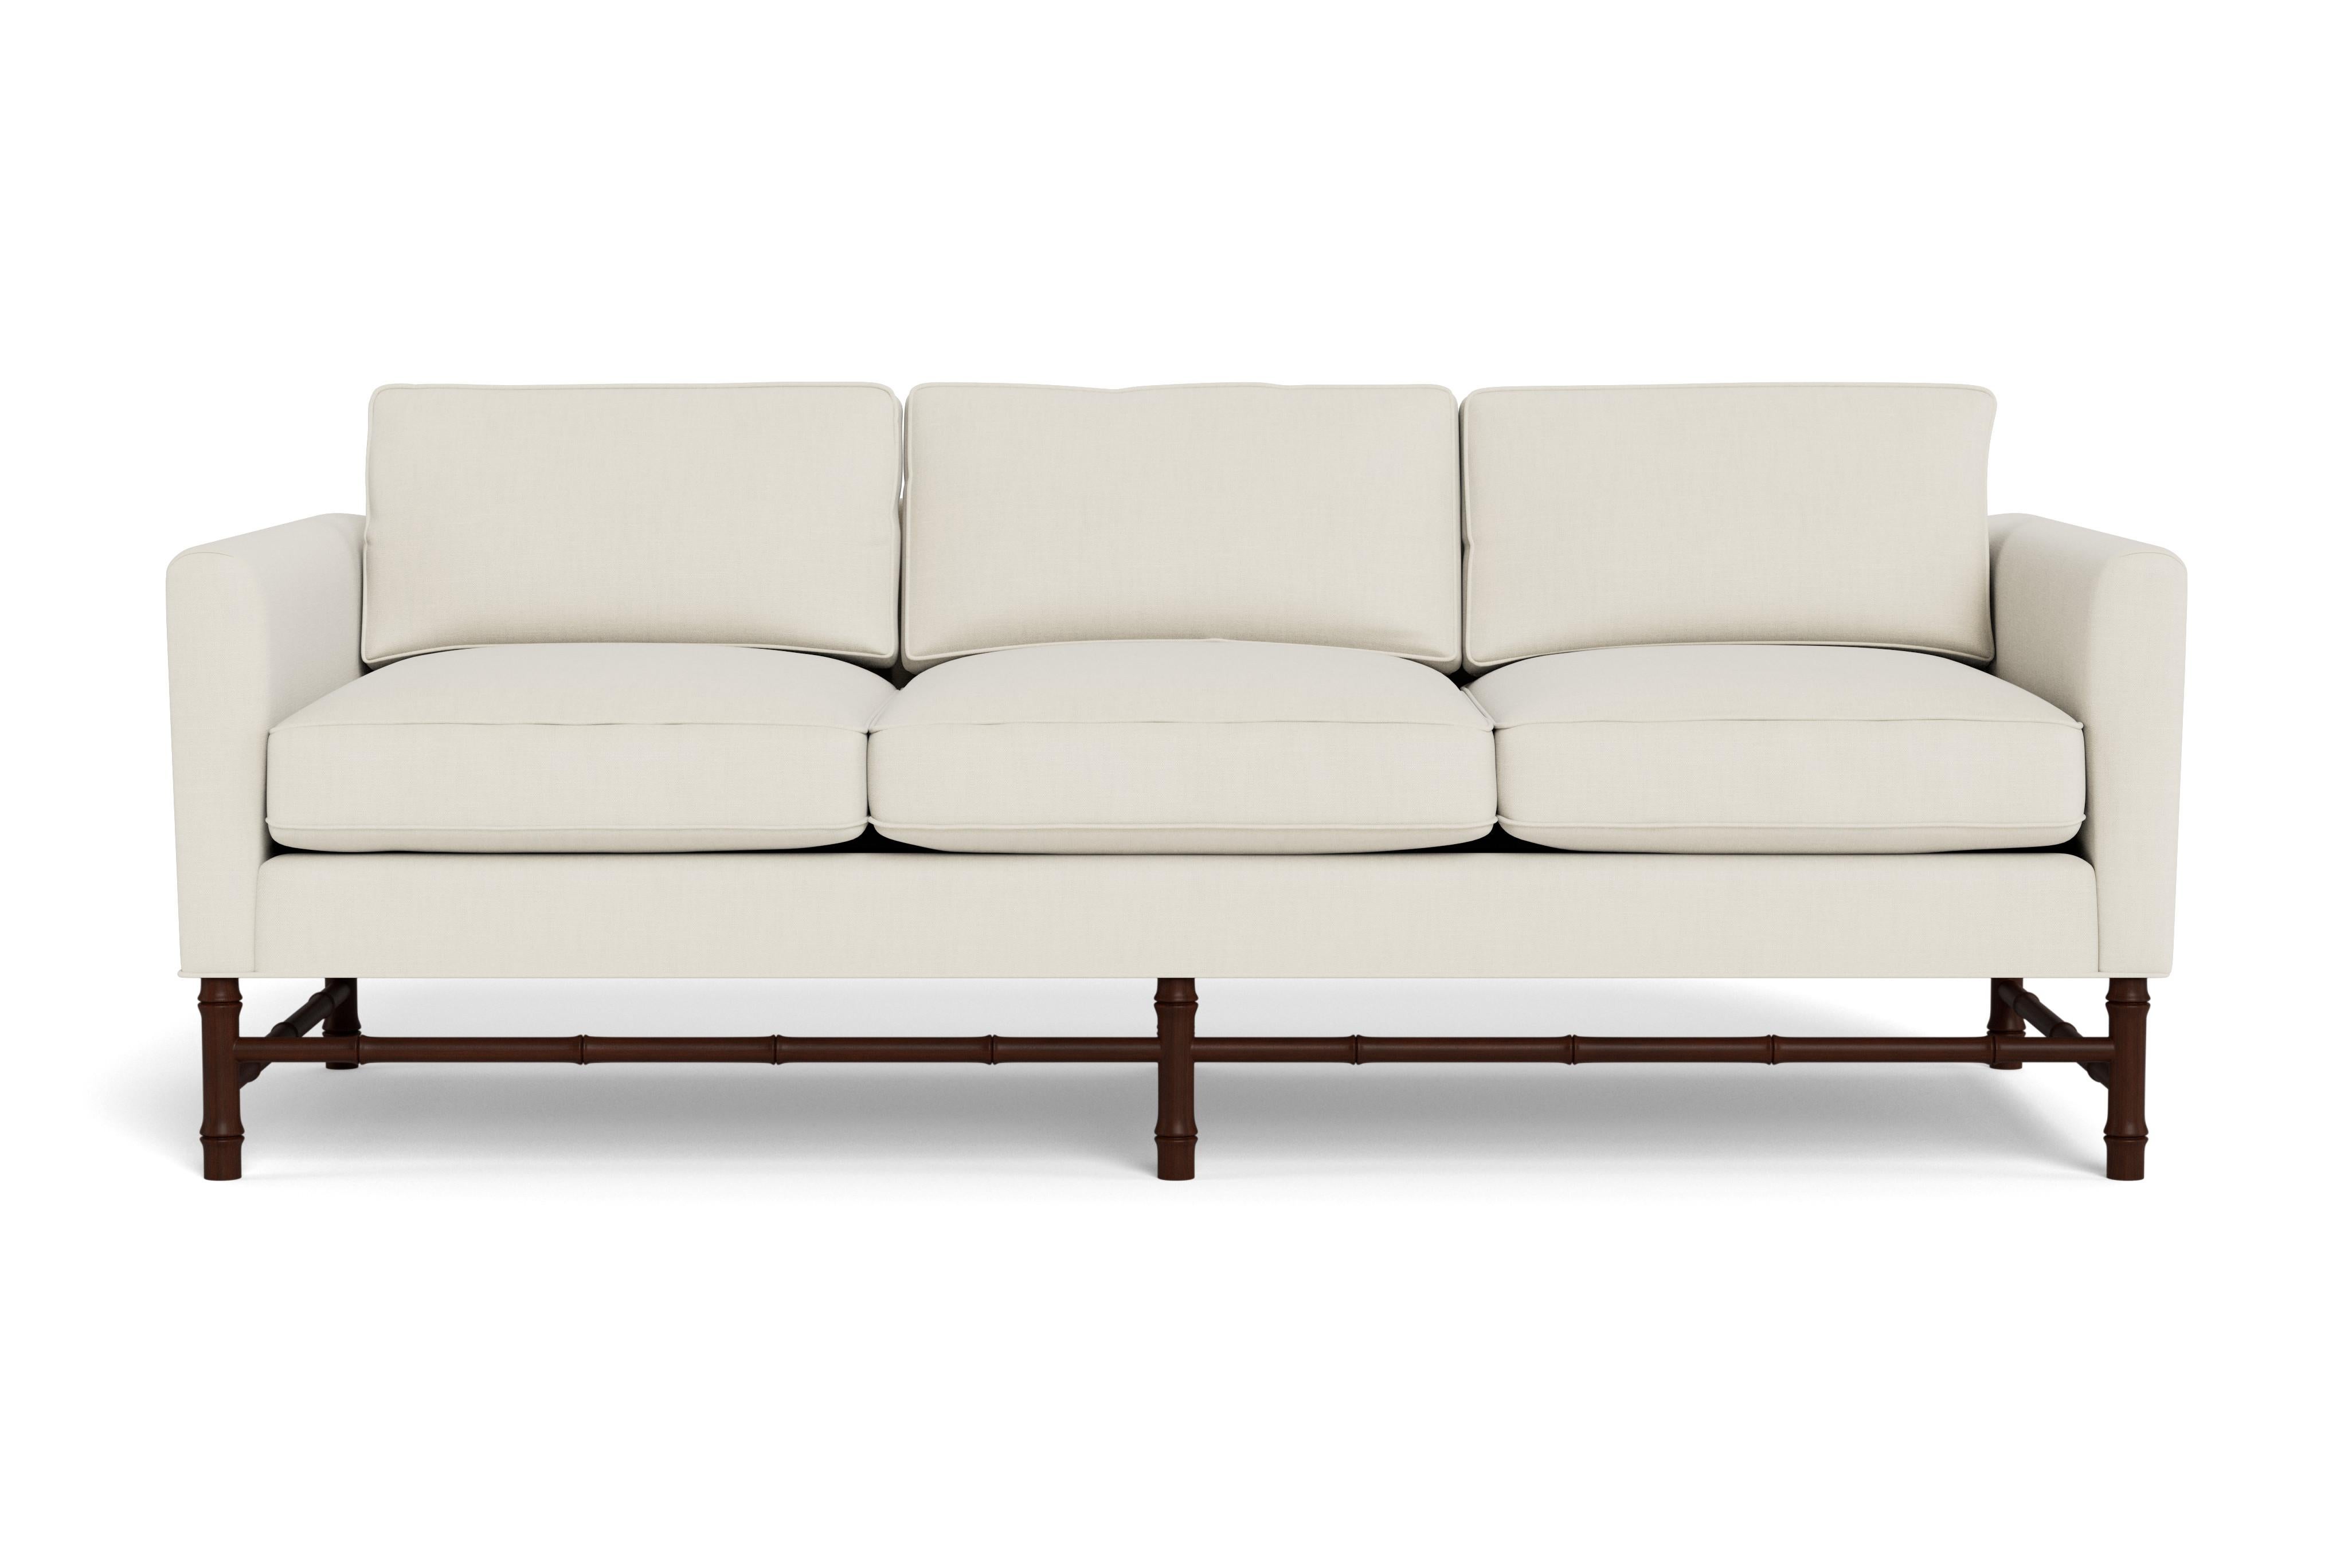 This comfortable sofa has classic, clean lines but the bamboo base gives it personality. Perfect for any style interior.  Made to order with a mahogany-stained base with our cream performance linen, a fabric able to be cleaned and used in high